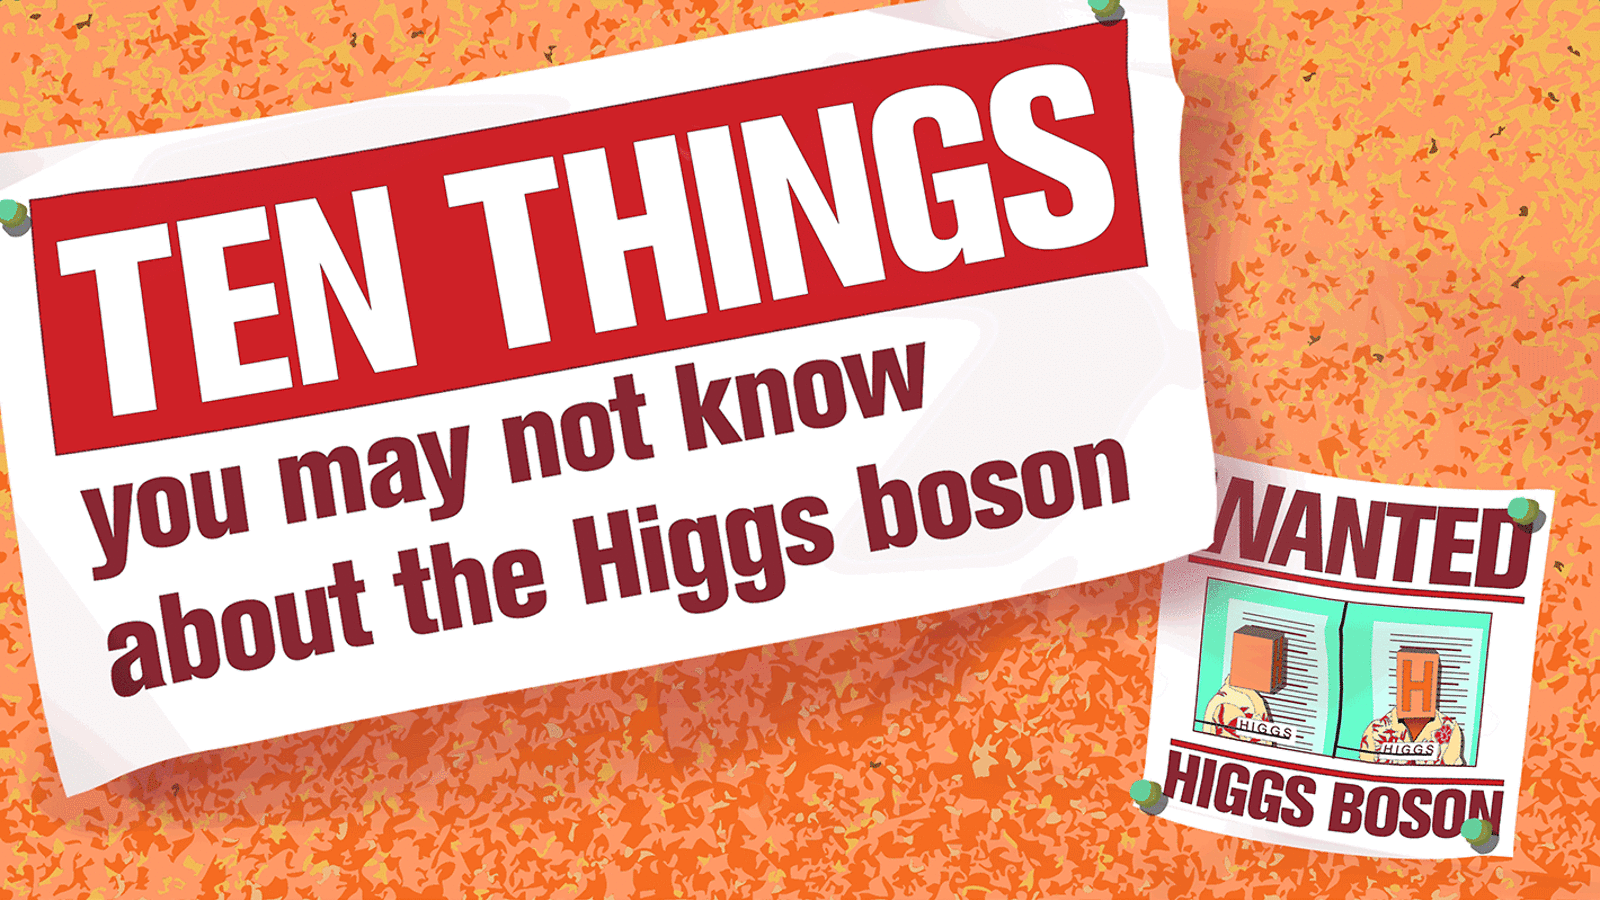 Illustration of "Ten things you may not know about the Higgs boson" on bulletin board "WANTED HIGGS BOSON"